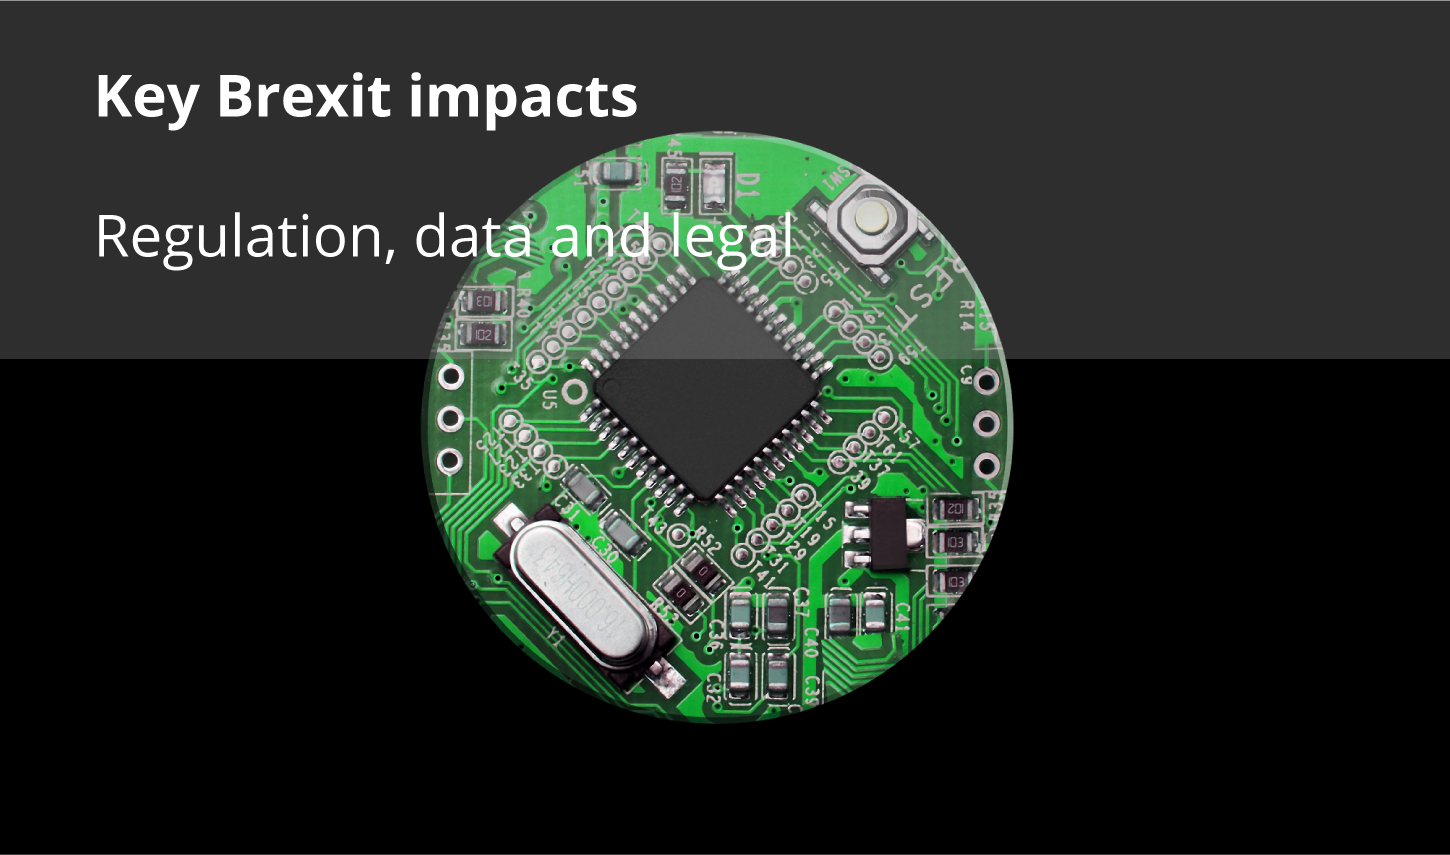 Key Brexit impacts: Regulation, data and legal